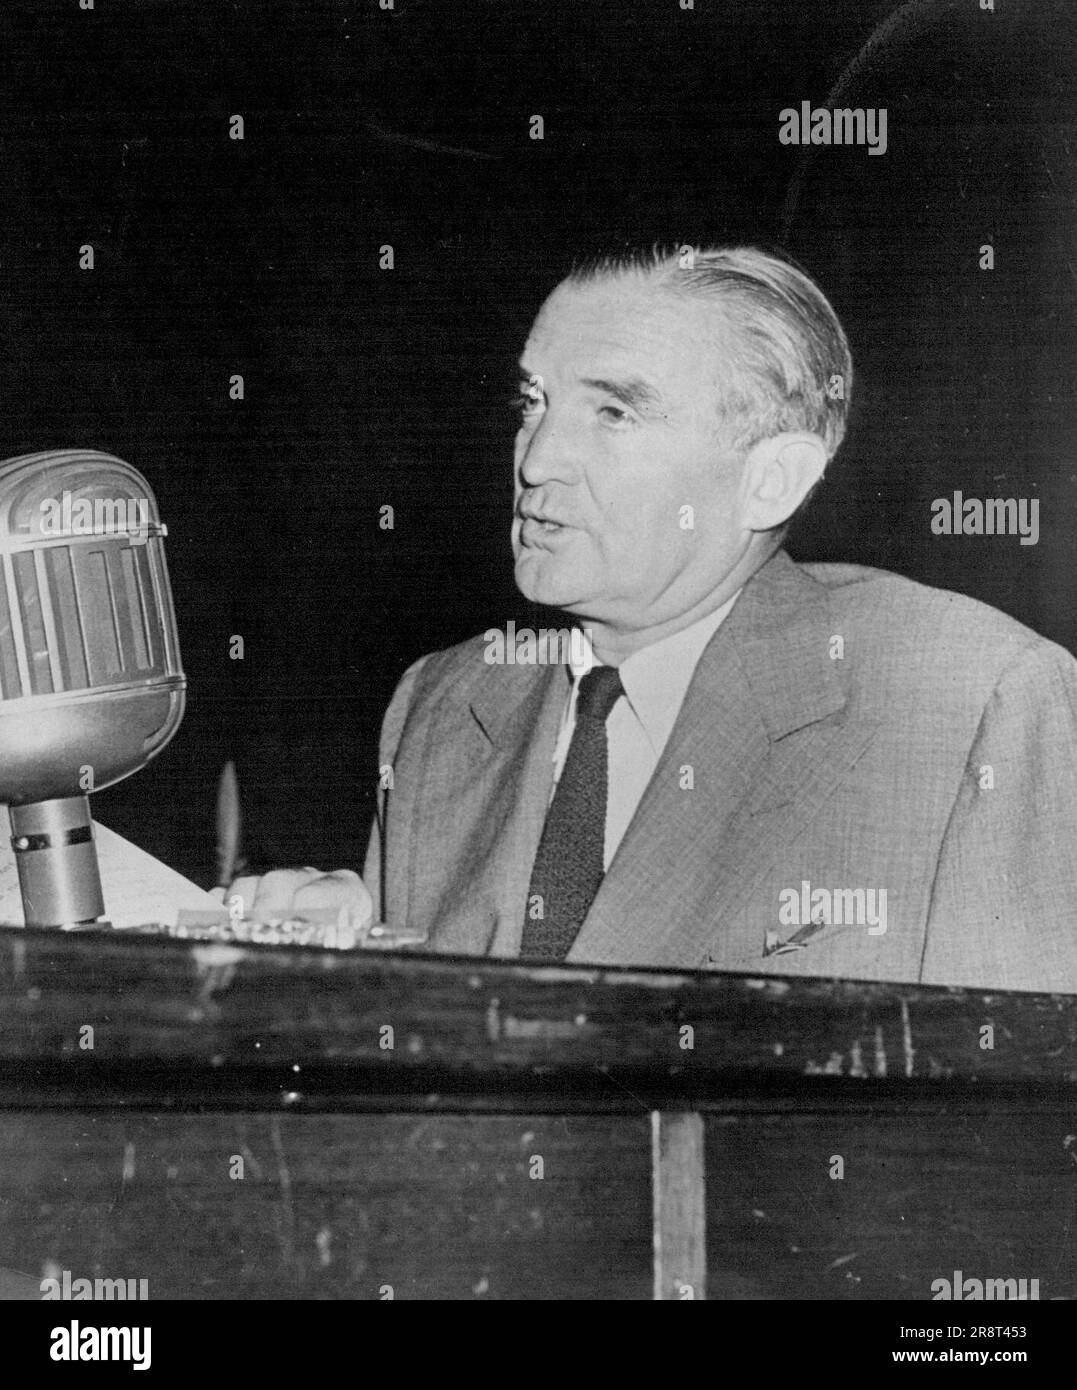 Stuart Symington - America's Chairman of the National Security Resources Board. March 06, 1951. (Photo by Camera Press). Stock Photo